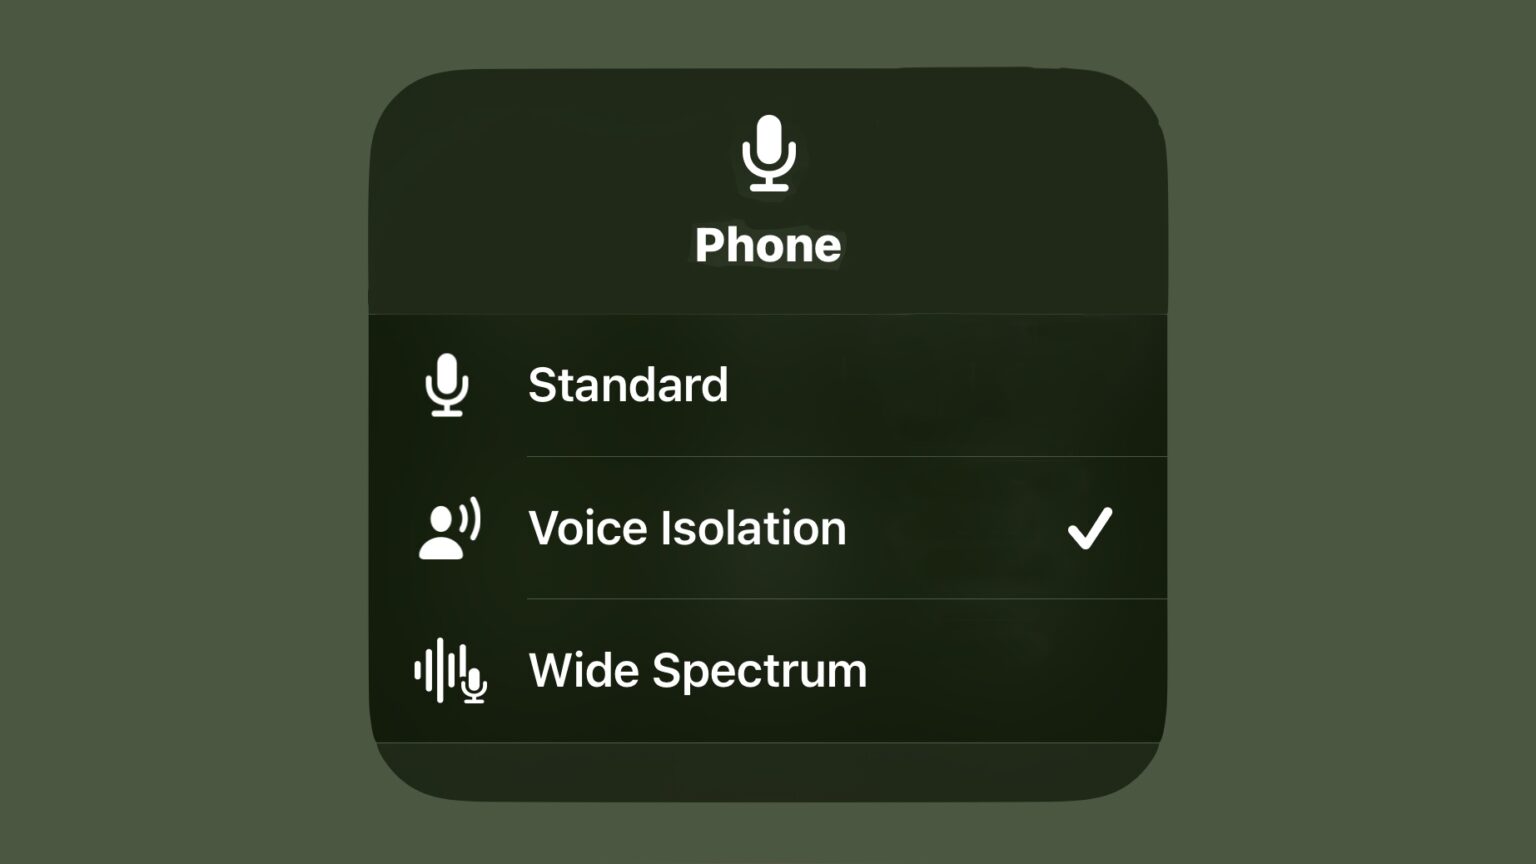 How to enable Voice Isolation for iPhone calls in iOS 16.4